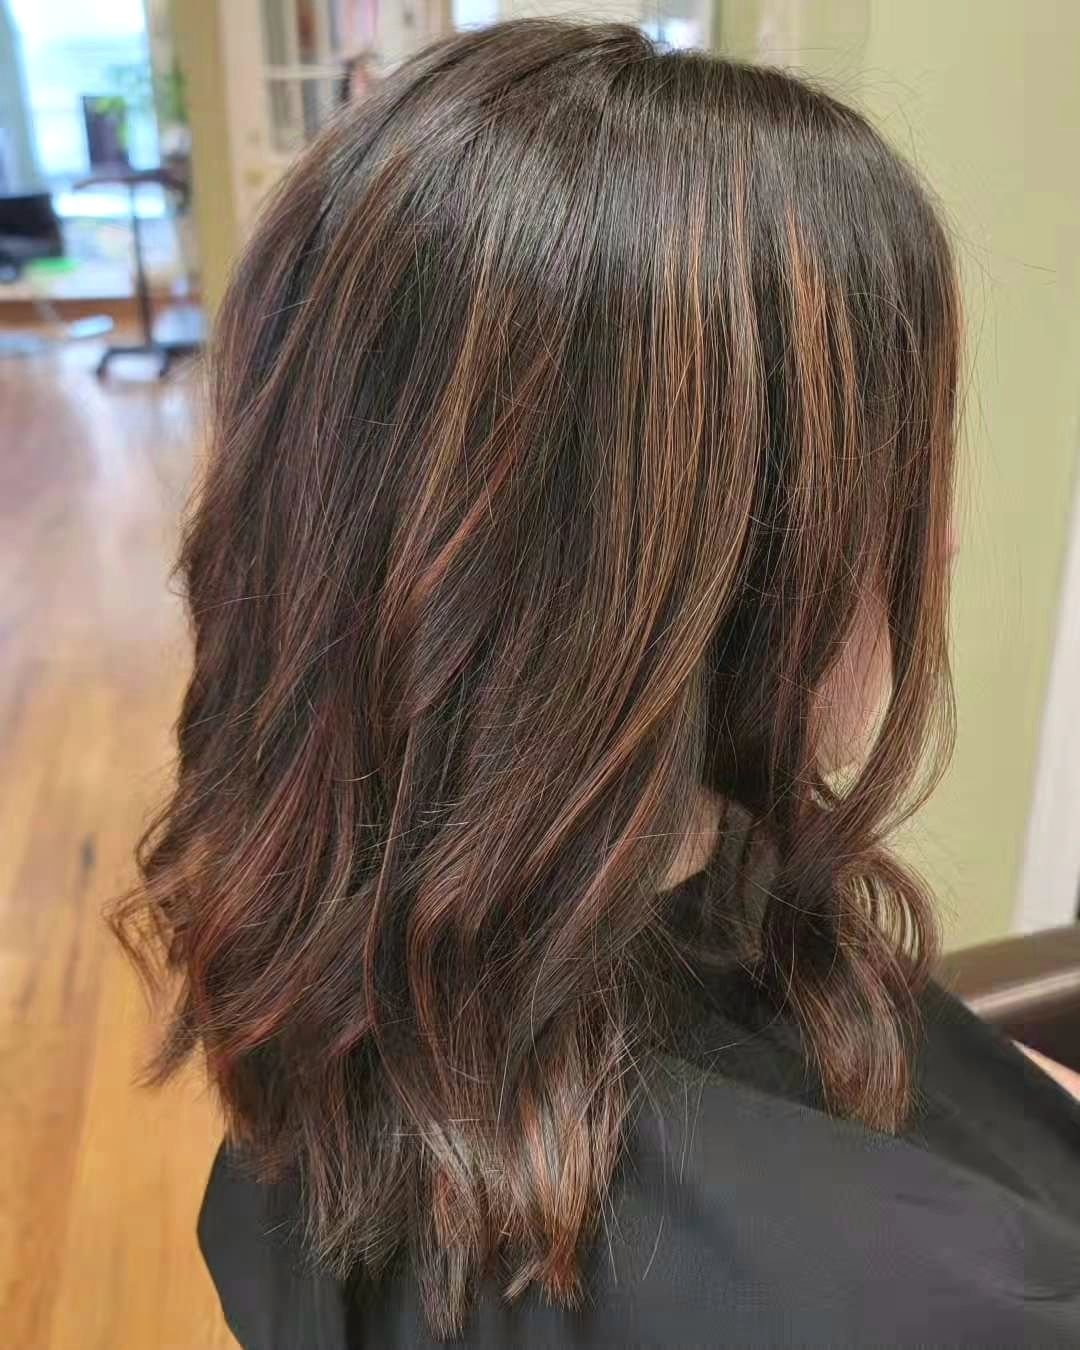 Some warm highlights for warmer weather done by our designer, Alyssa. Let her or any of our beauty professionals help you find the color that best fits your lifestyle. Swipe through to see the before.
 Book an appointment today at
https://balancehair